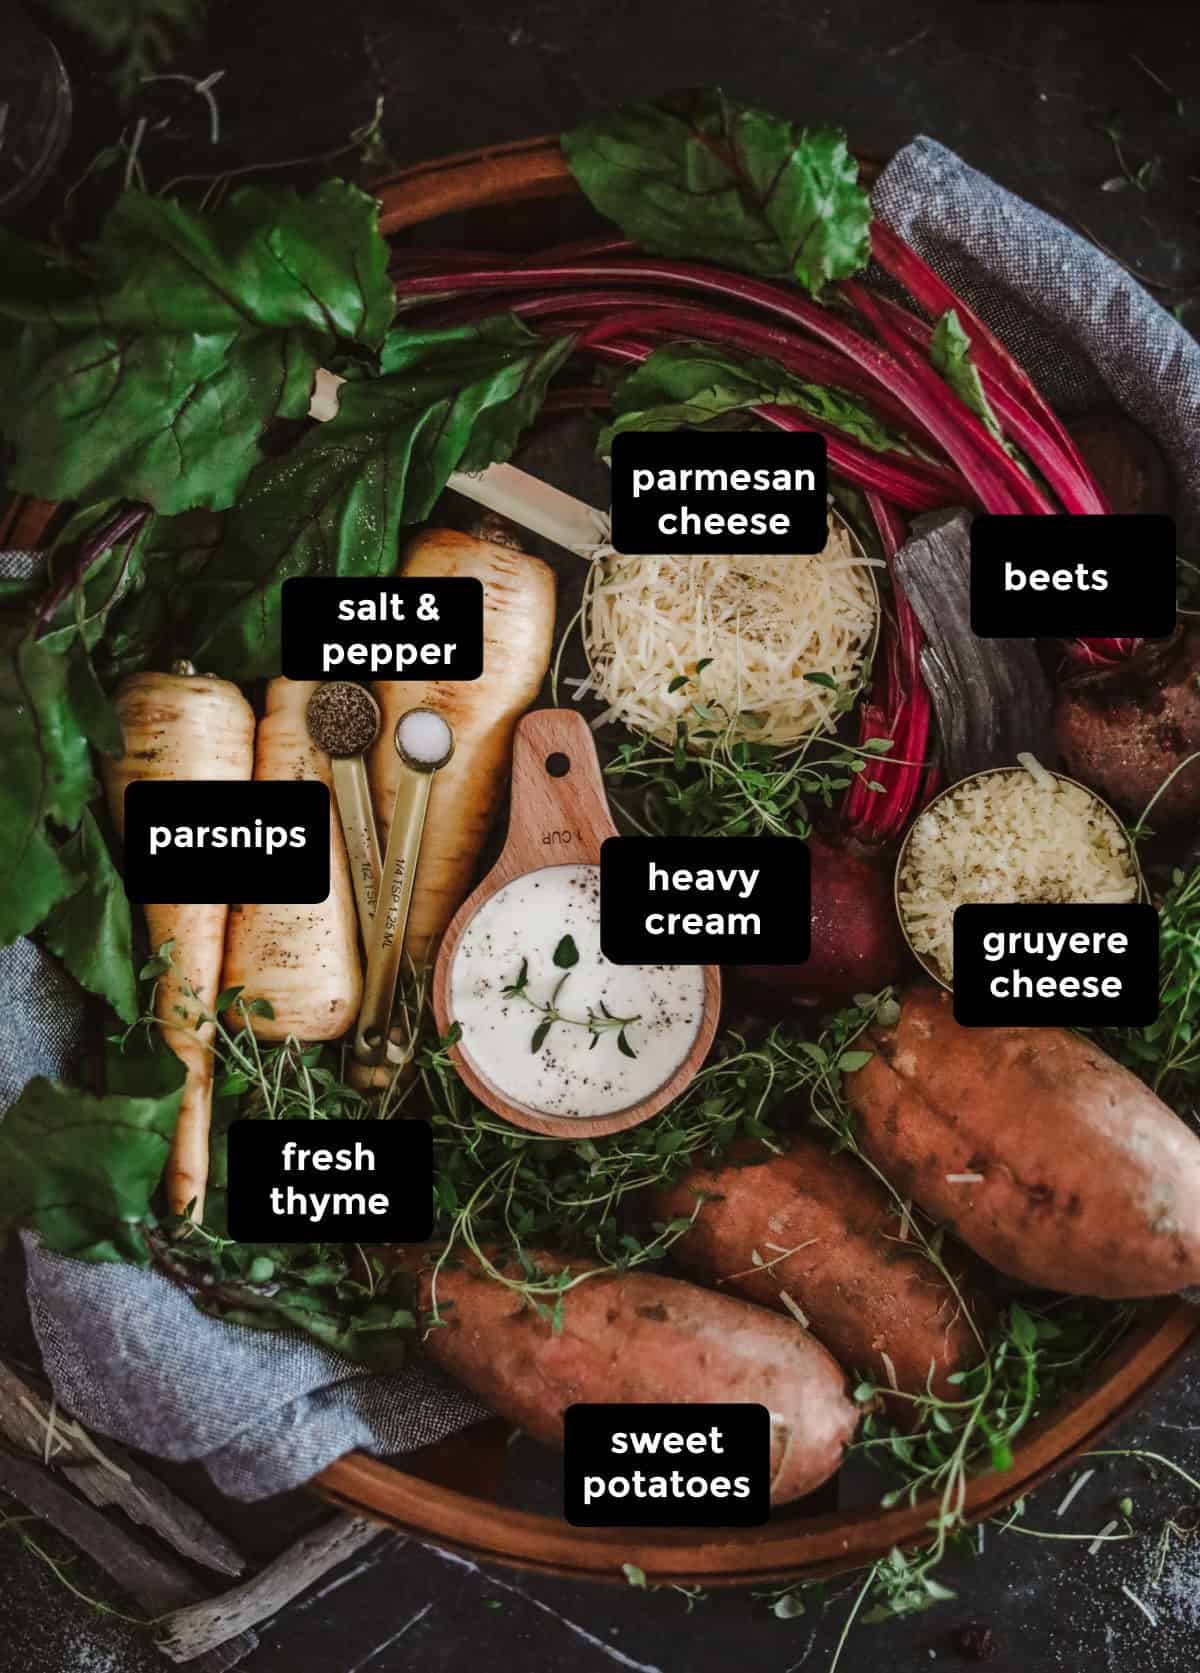 Parsnips, sweet potatoes, beets, cheeses, cream, salt, pepper, and thyme in a wood bowl.